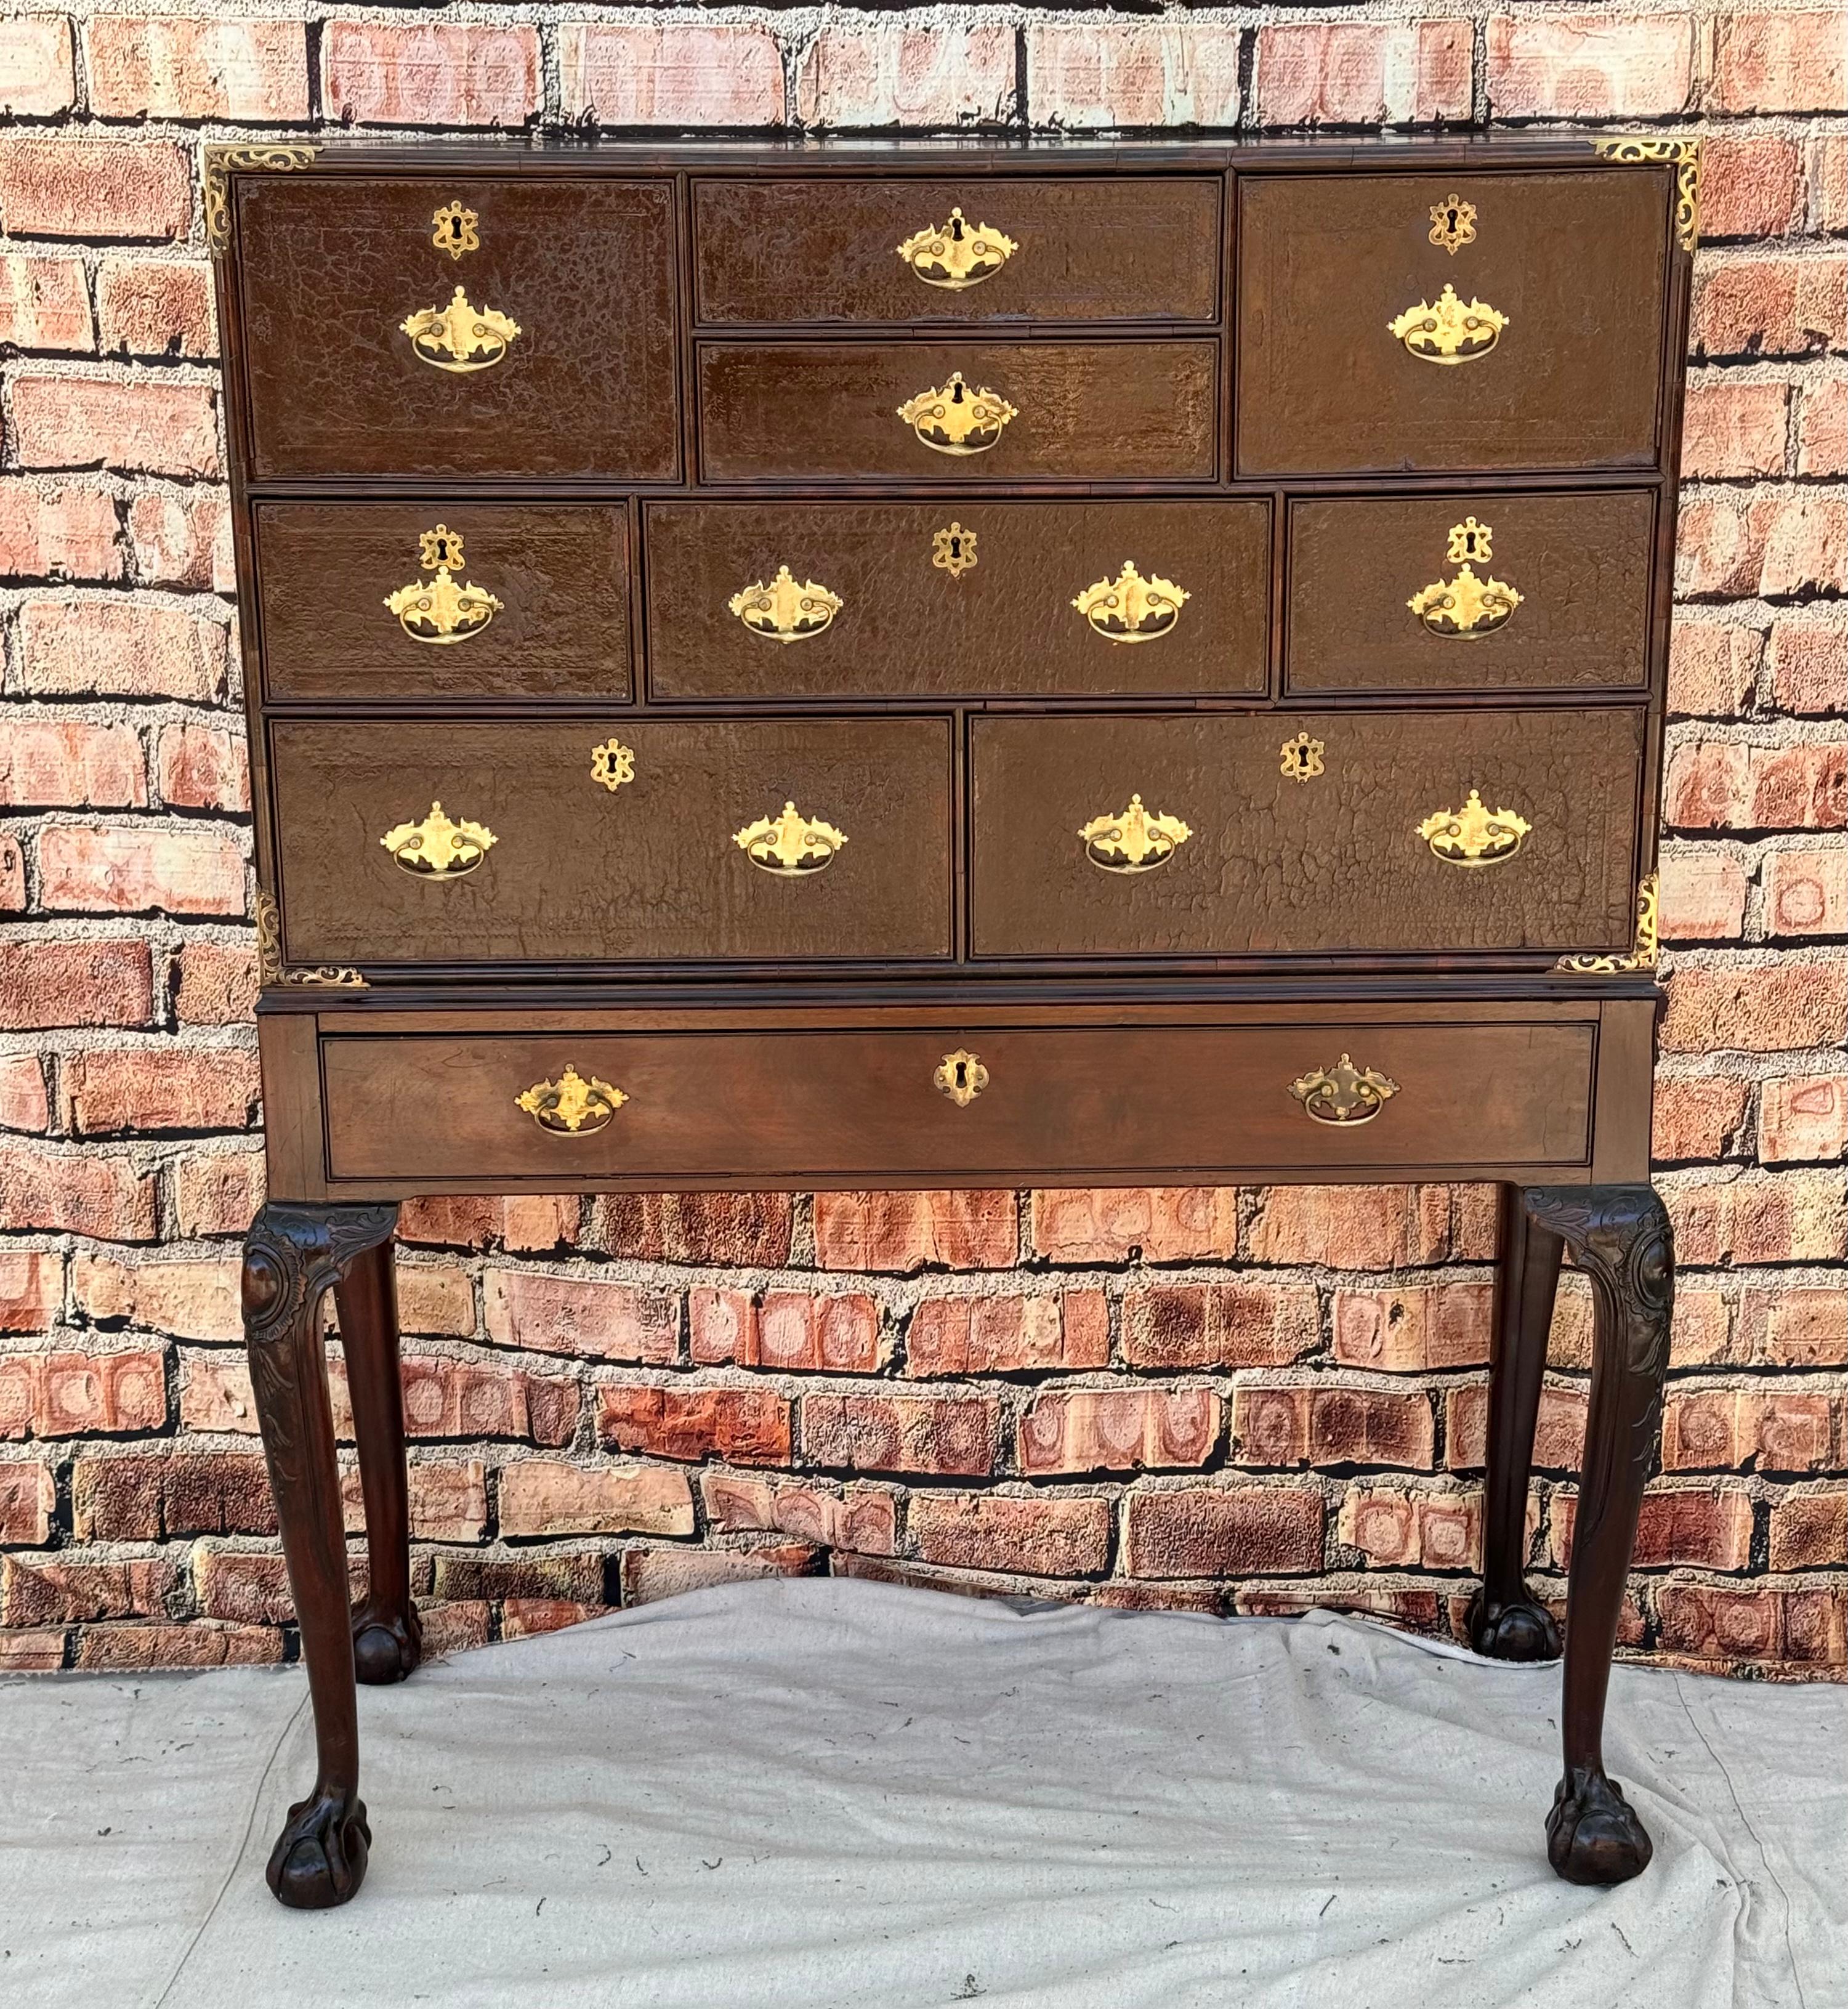 19th century Campaign desk or cabinet on stand. Stained leather drawer fronts opening to cubby holes on top and drawers below. The base with one drawer also. Standing on land legs with carved knees and ball and claw feet. The mahogany showing a nice